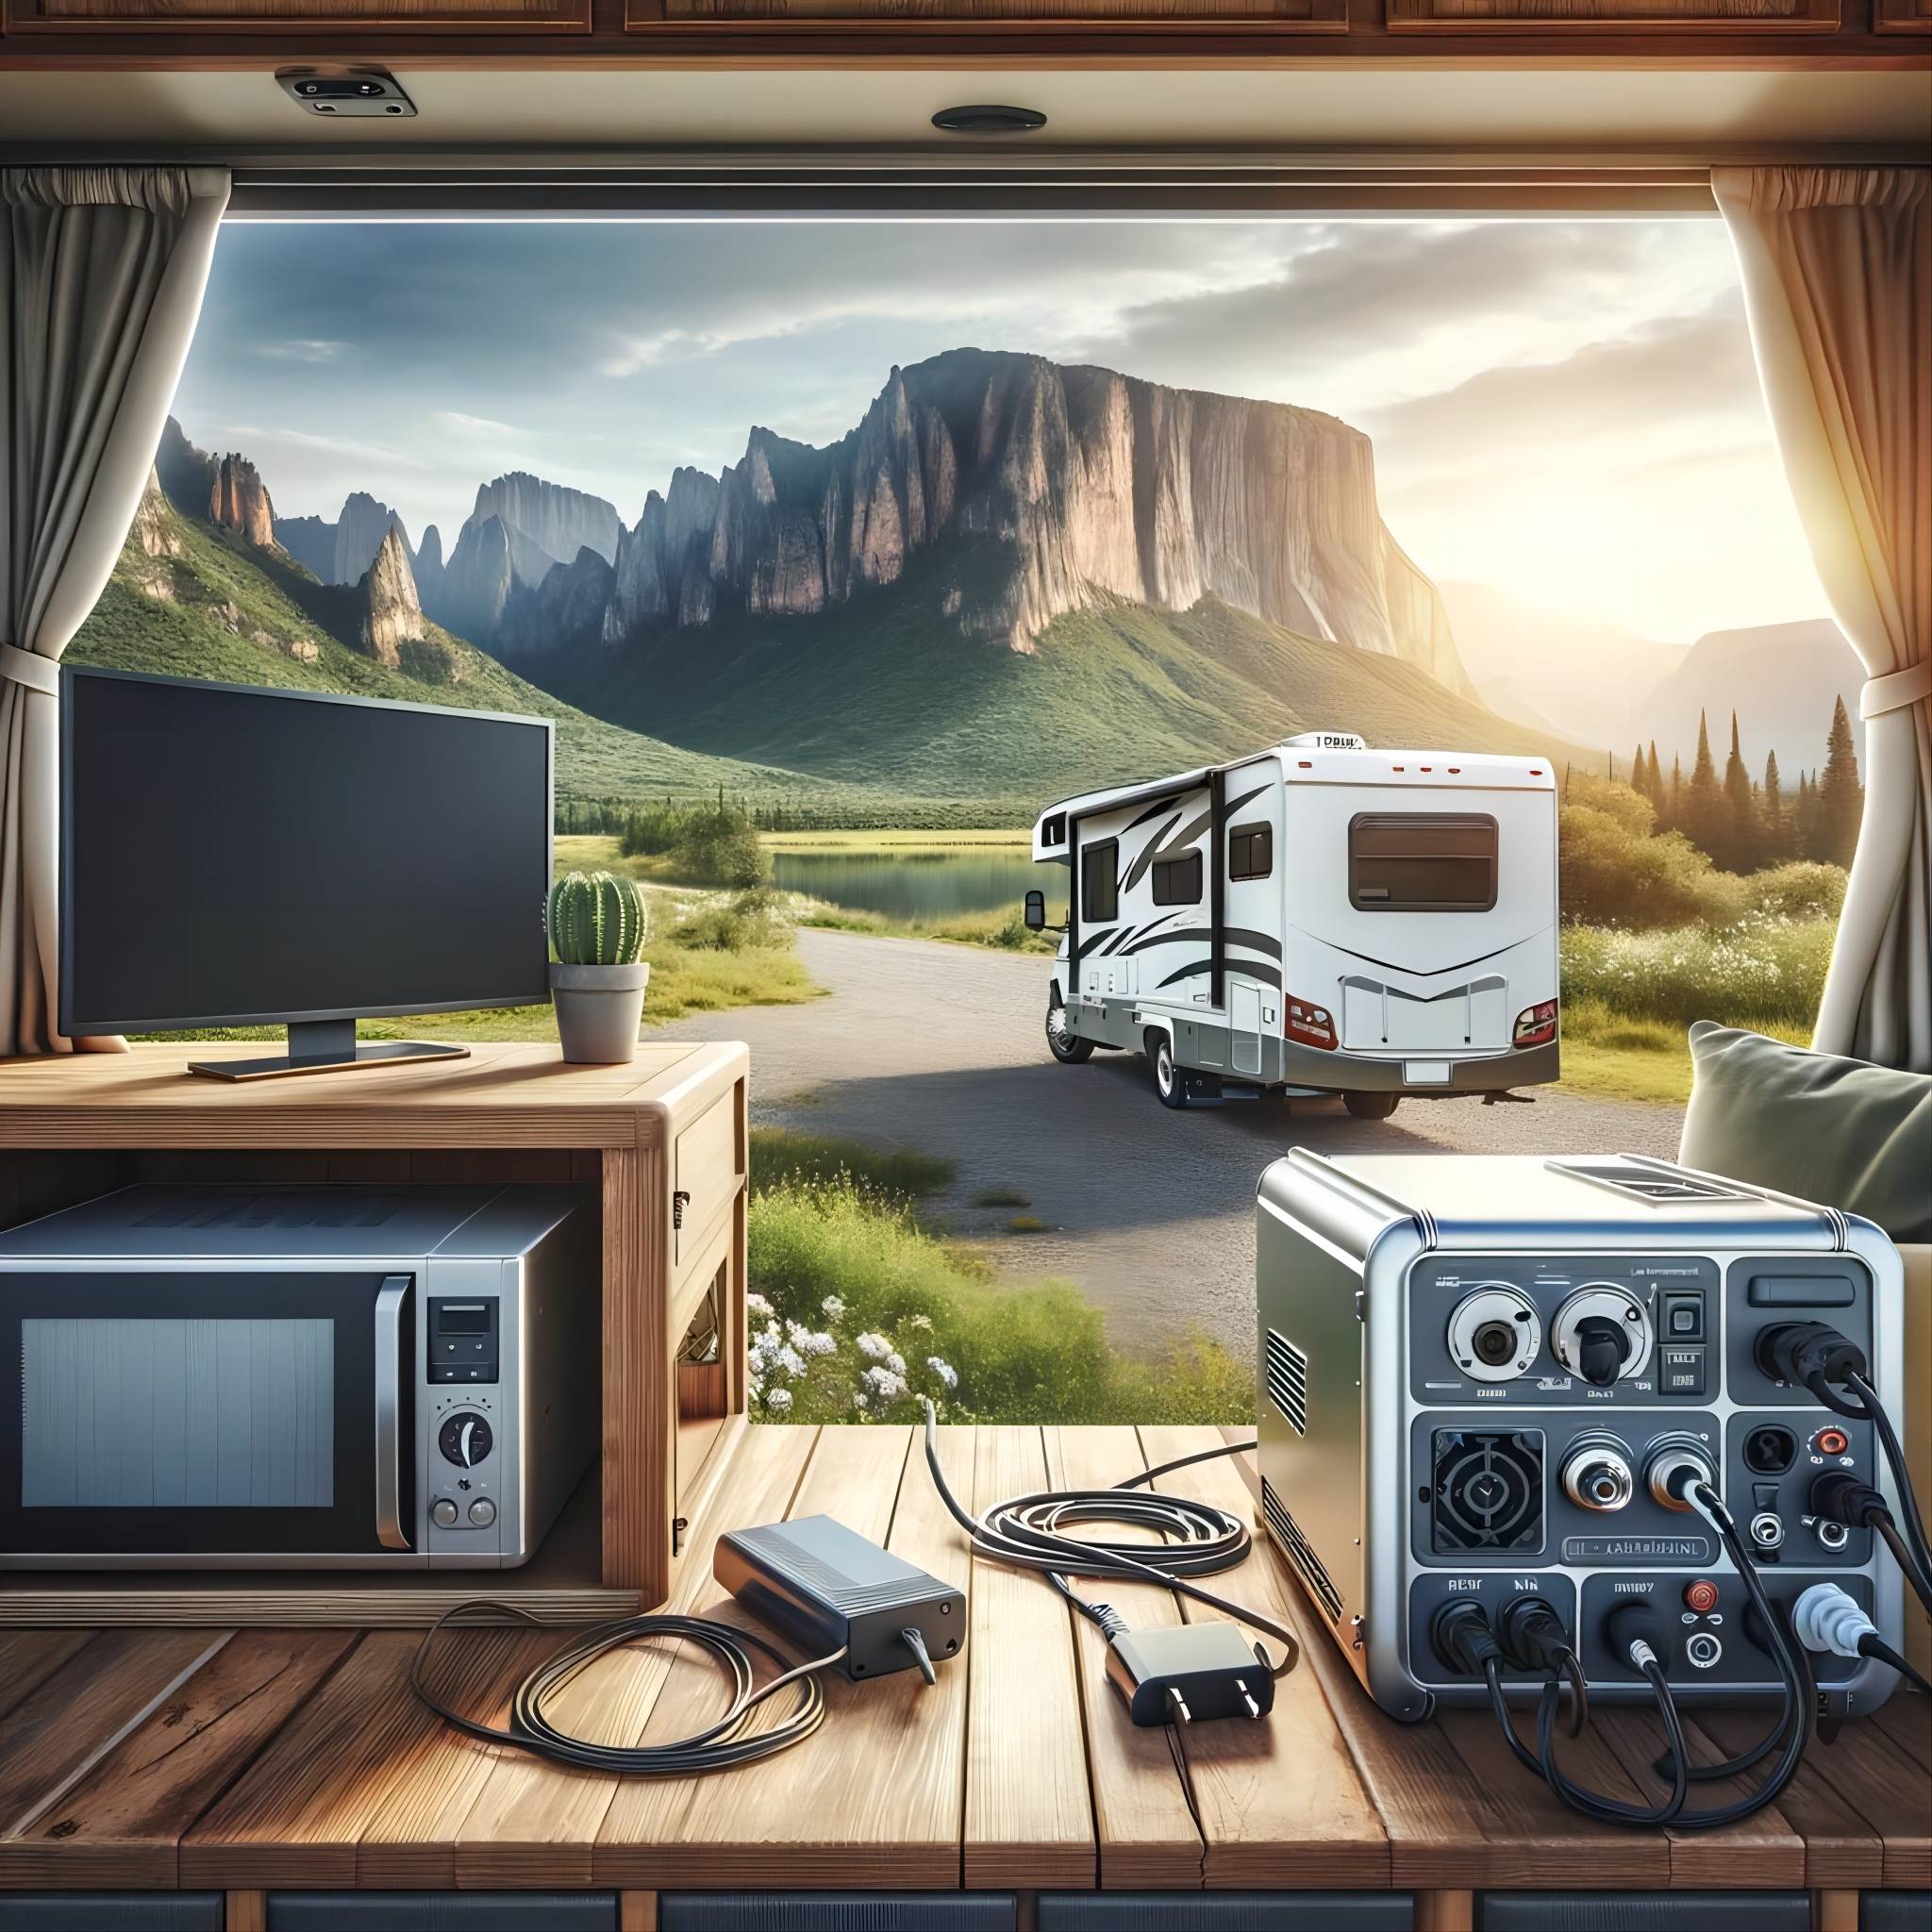 Practical Guide to Choosing the Right Inverter for Your RV